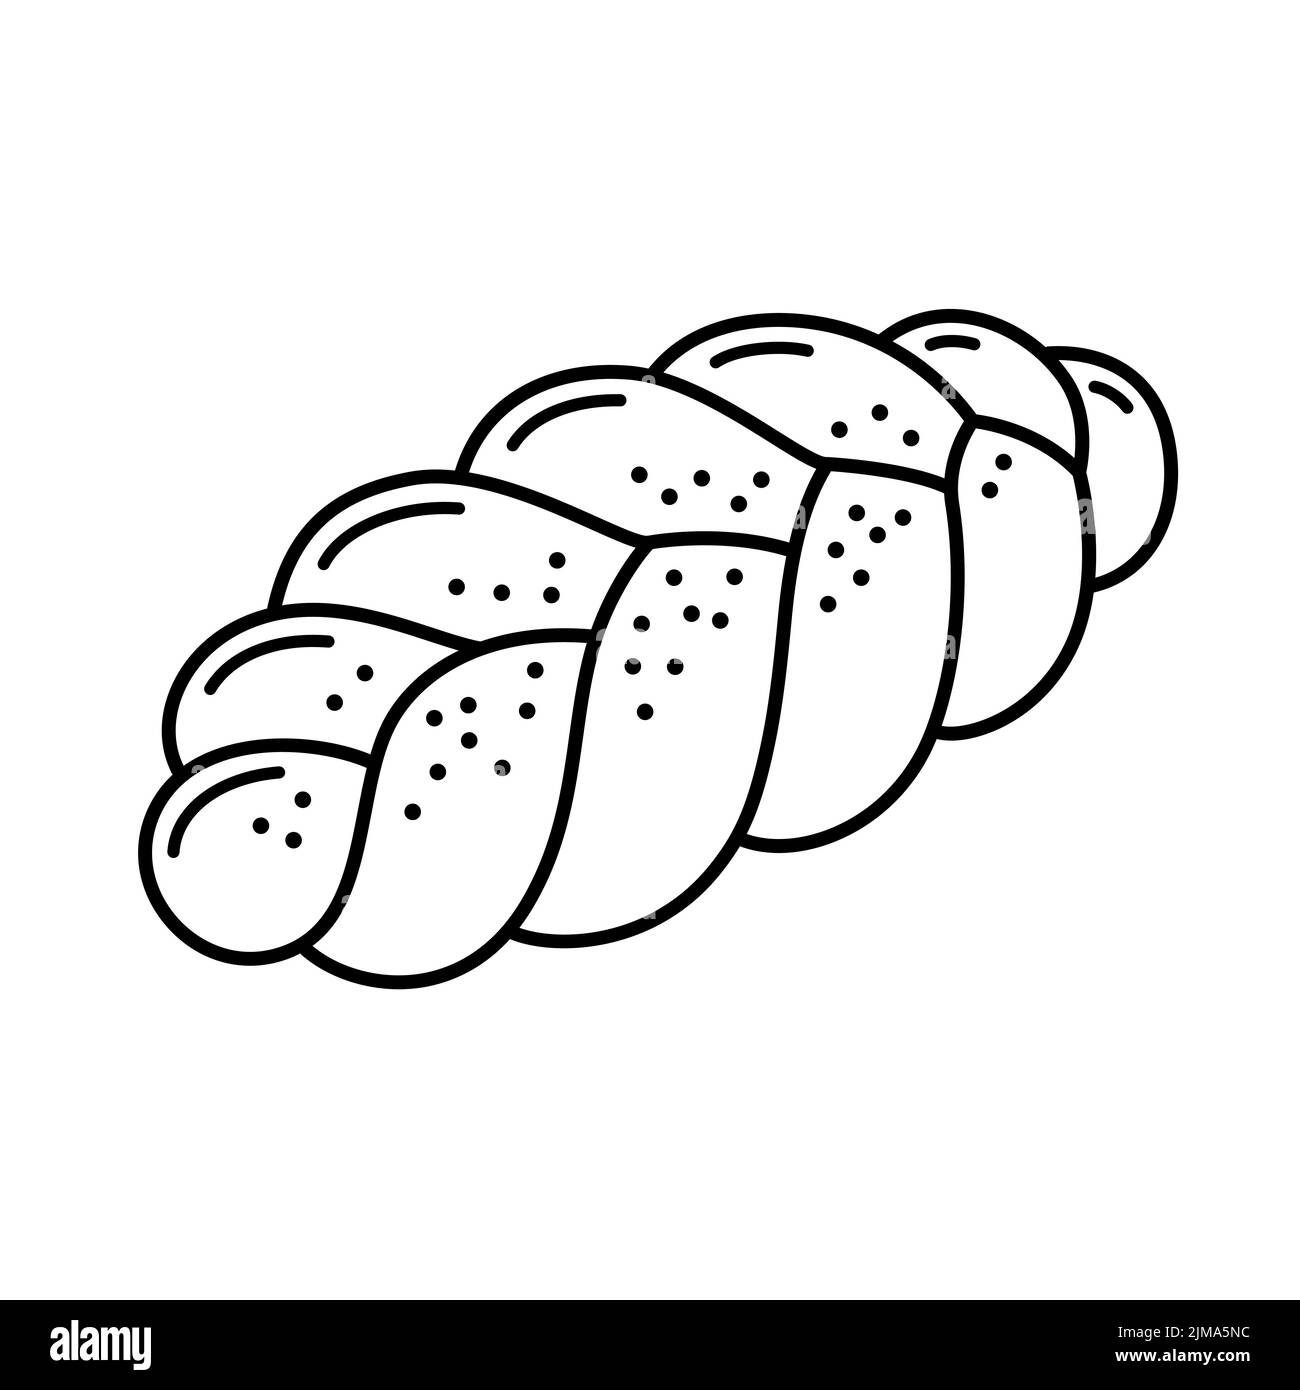 Challah, traditional braided bread loaf. Black and while line icon. Cartoon vector clip art illustration. Stock Vector